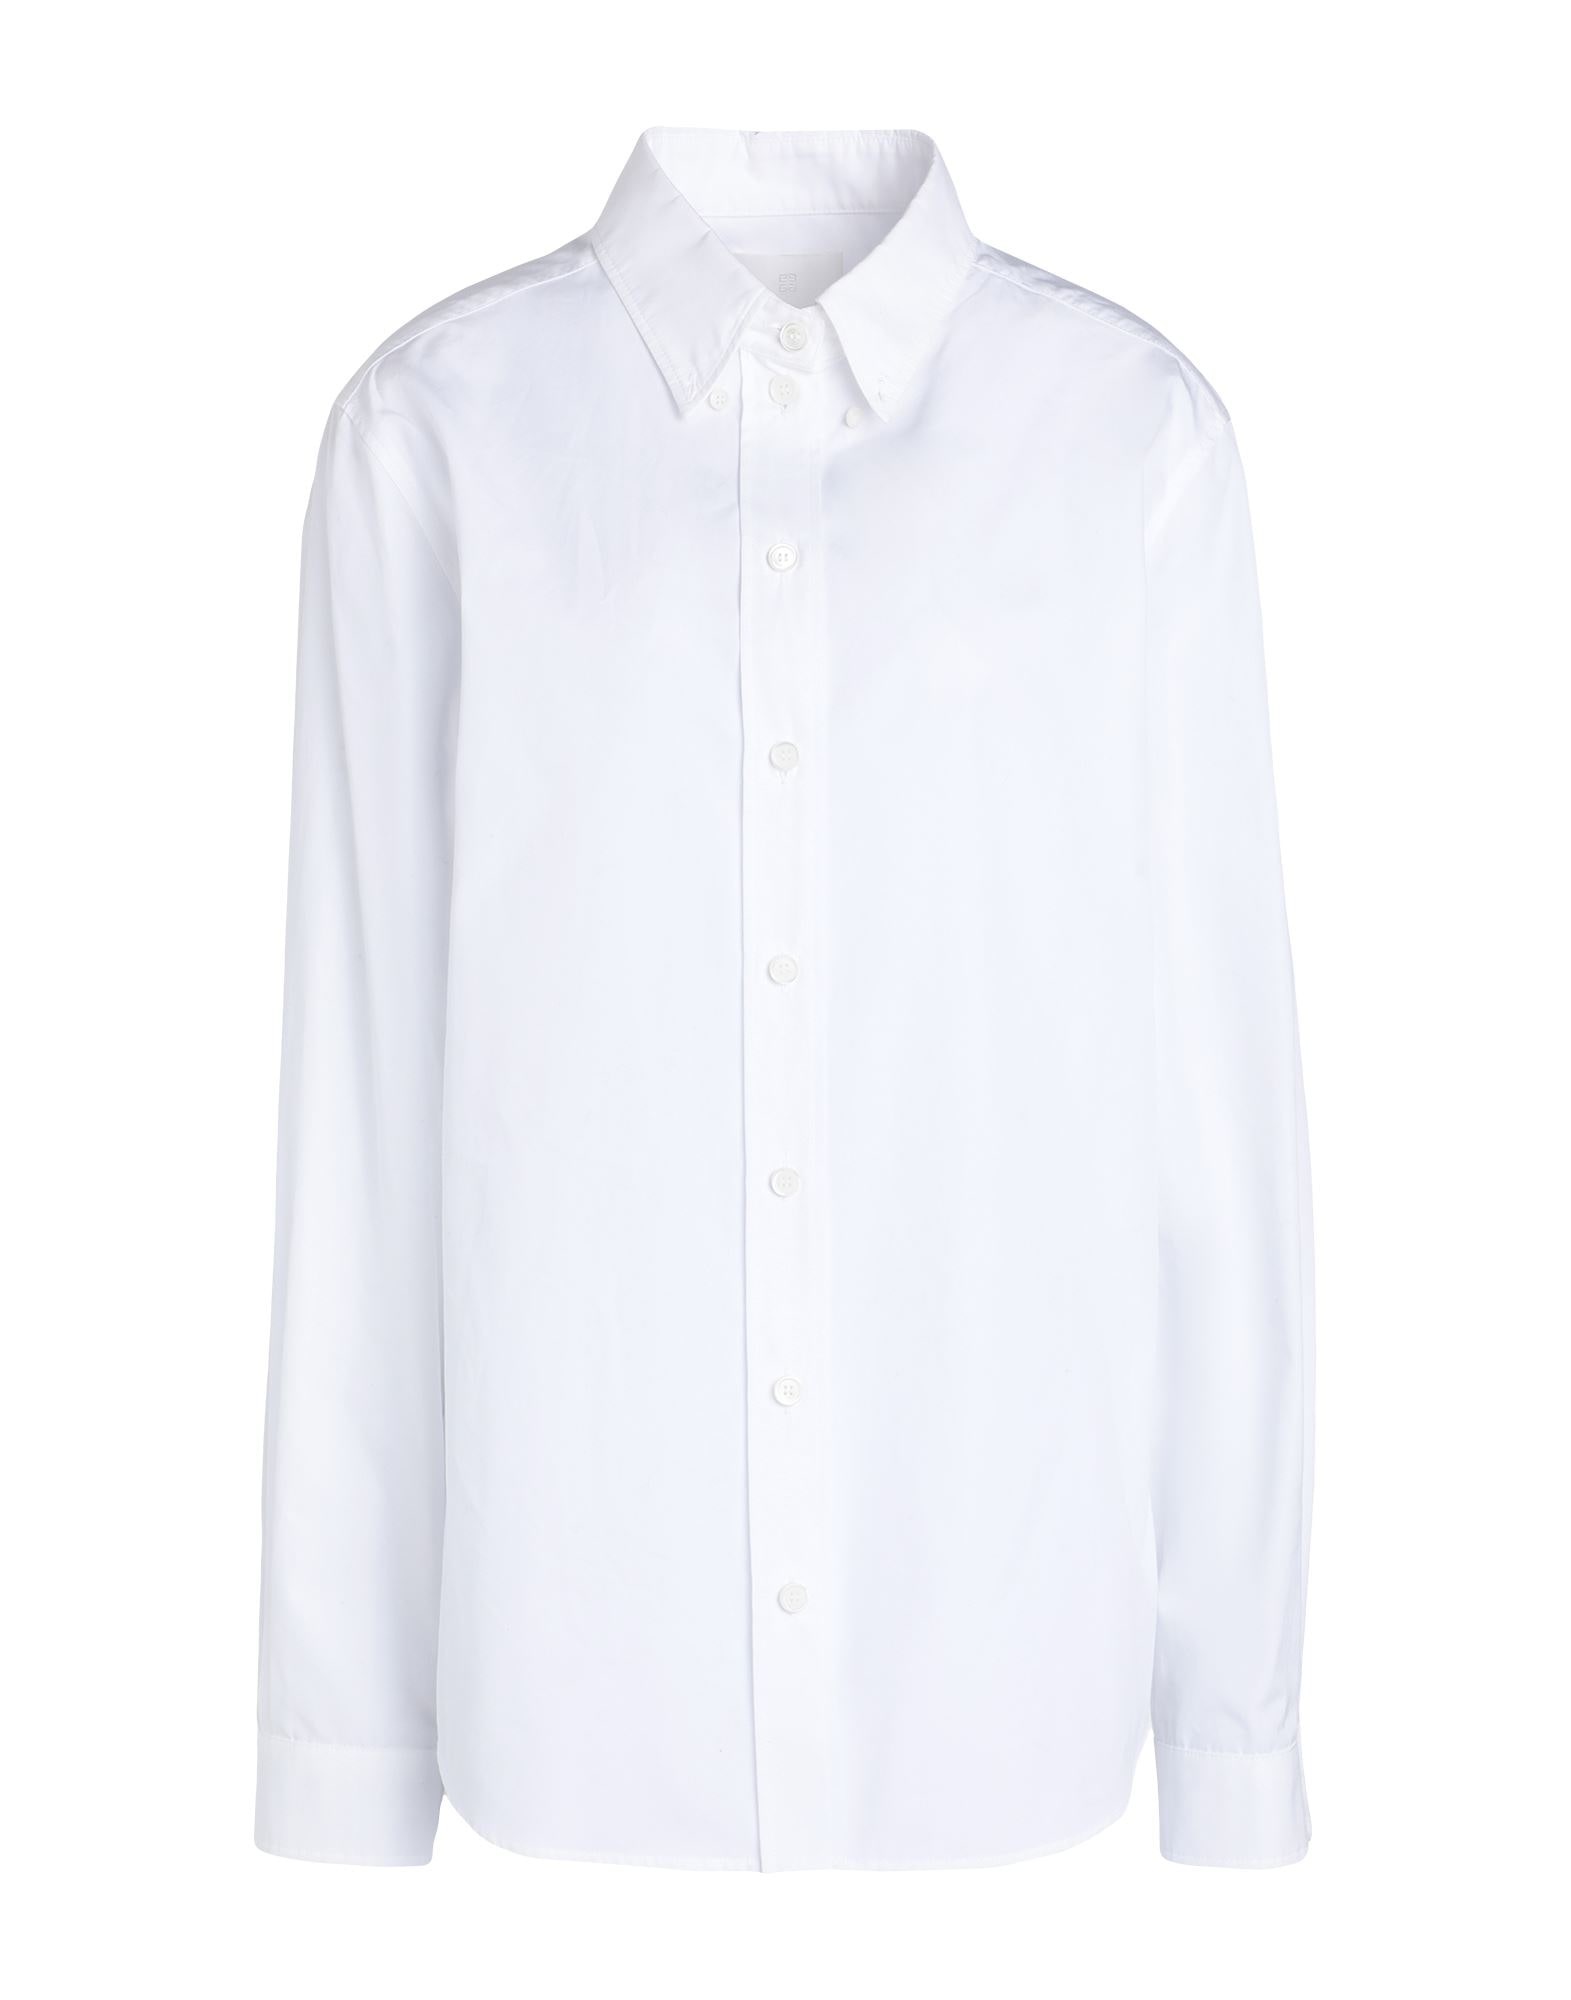 White Women's Solid Color Shirts & Blouses - 1